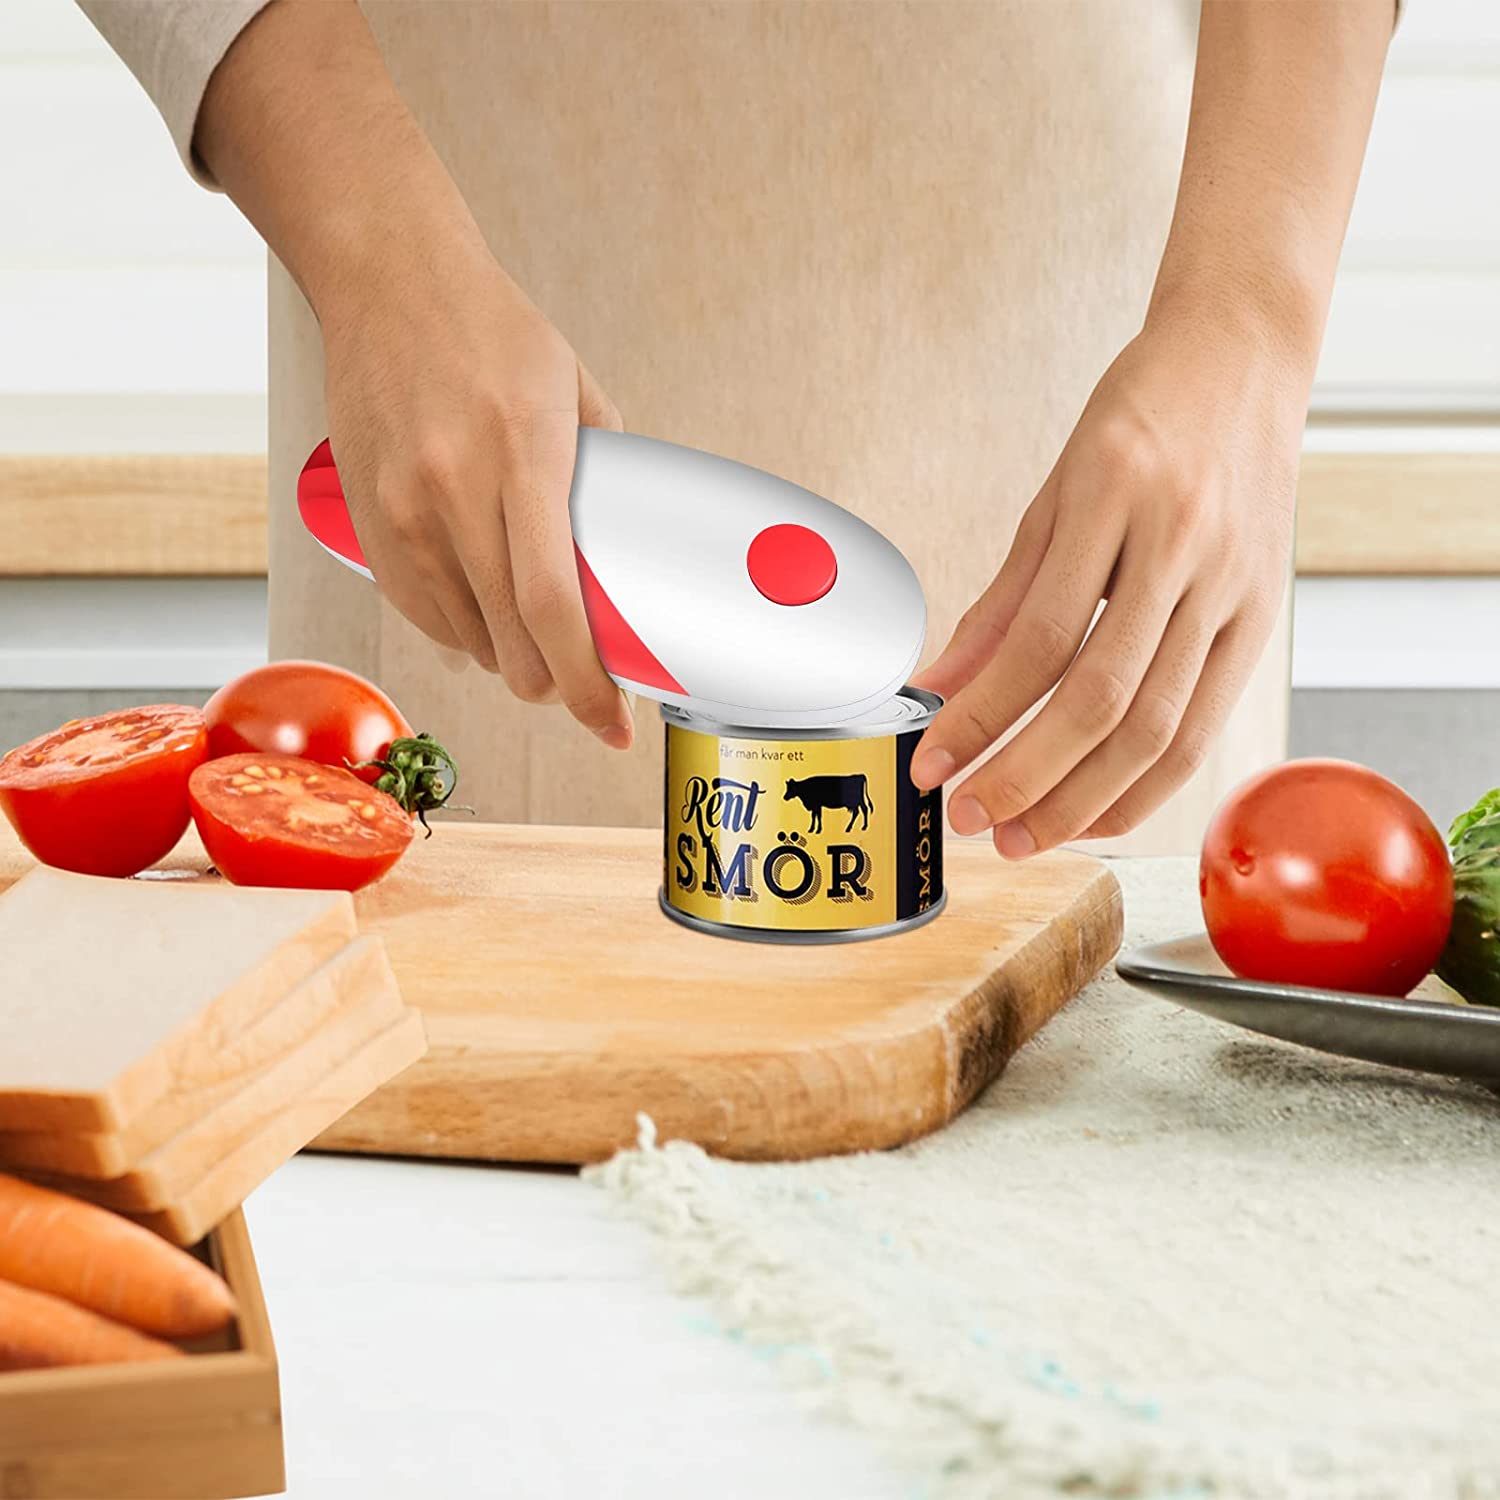 Vcwtty RNAB0BFQHL3CN electric can opener - vcwtty one touch